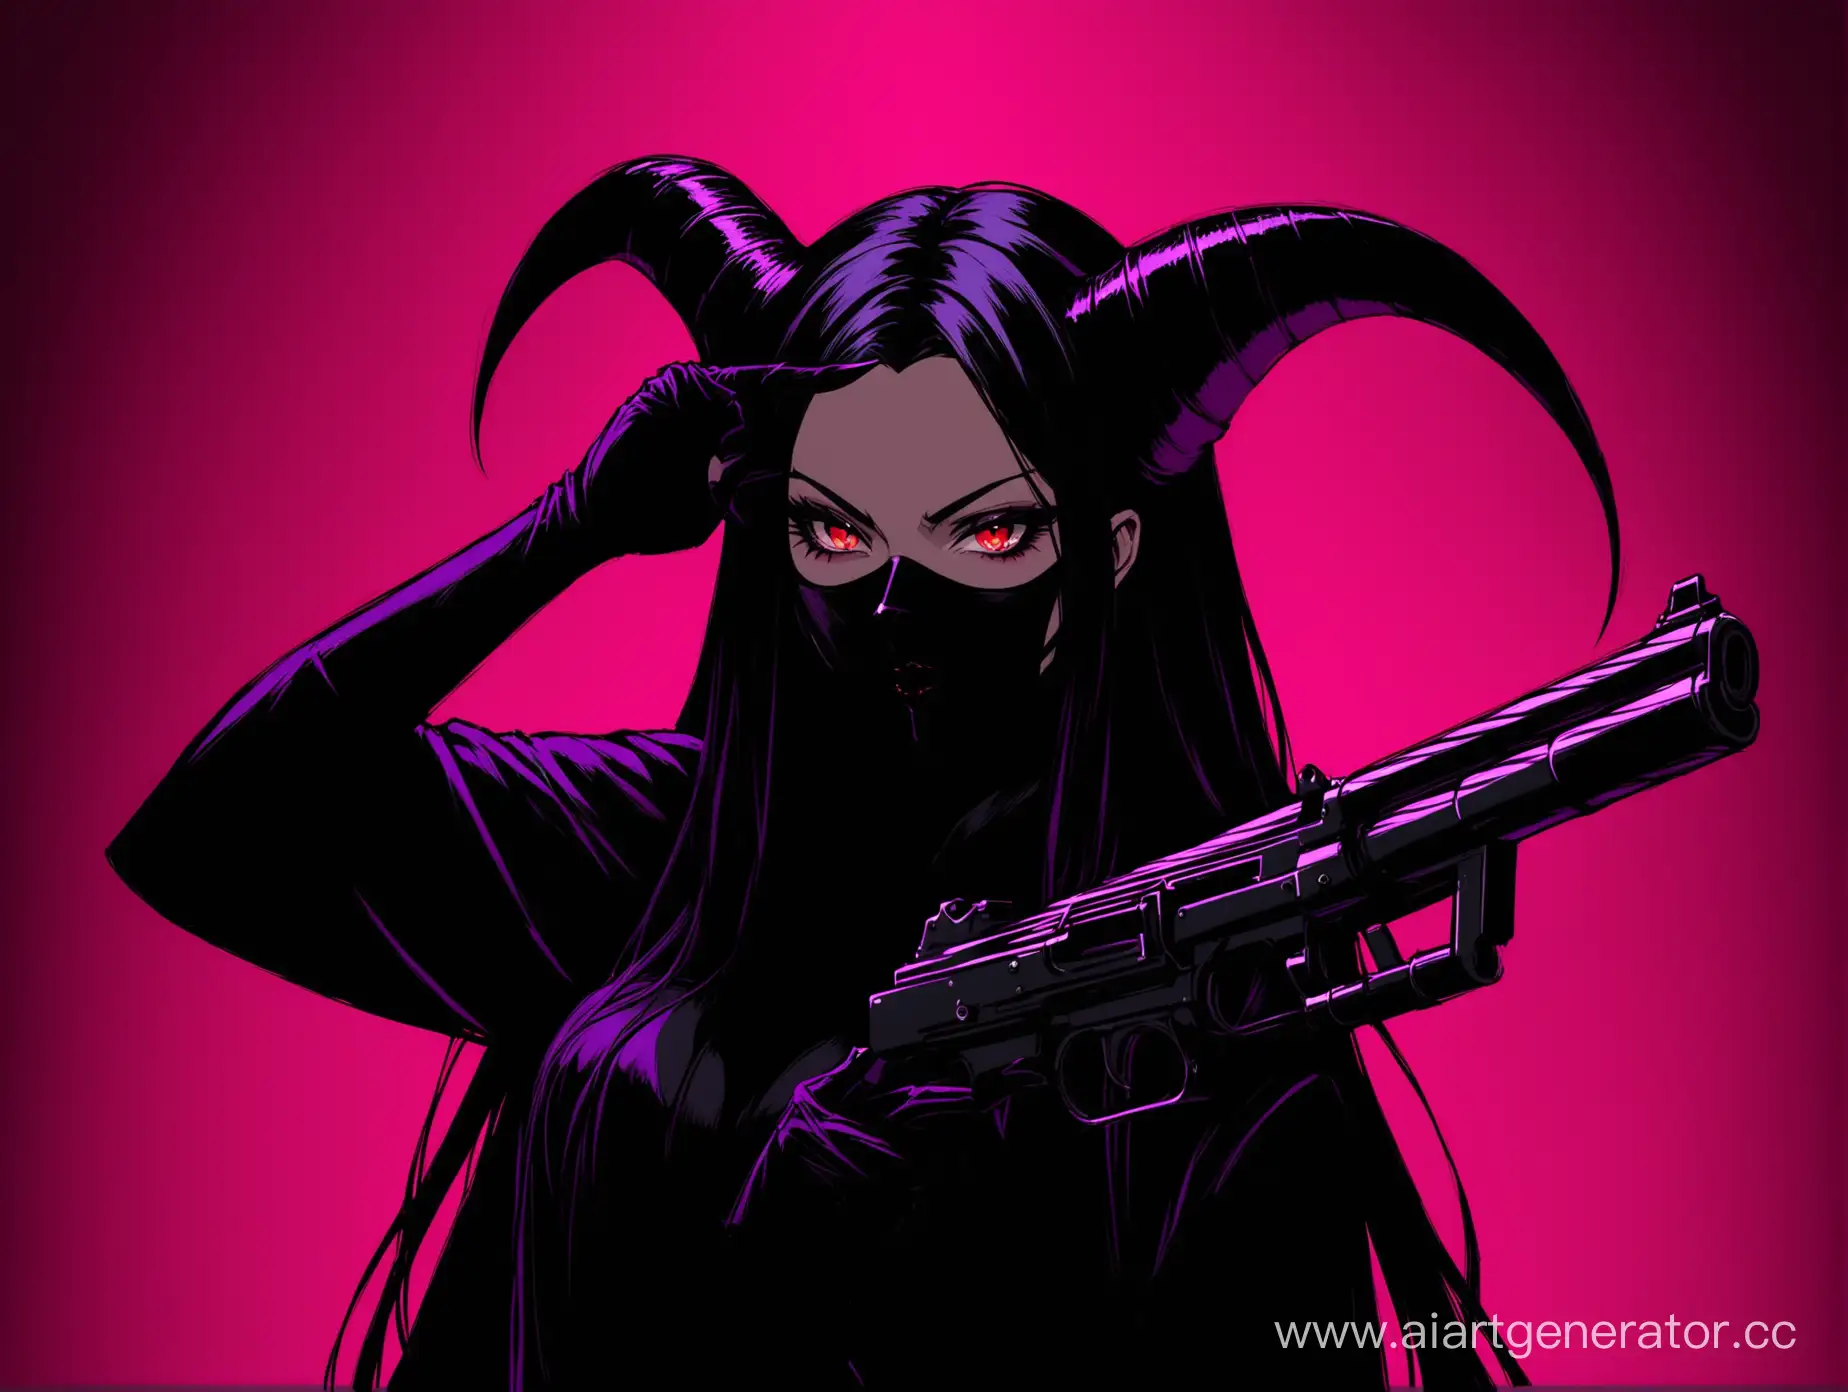 Mysterious-Horned-Girl-with-Black-Mask-and-Gun-against-Neon-Background